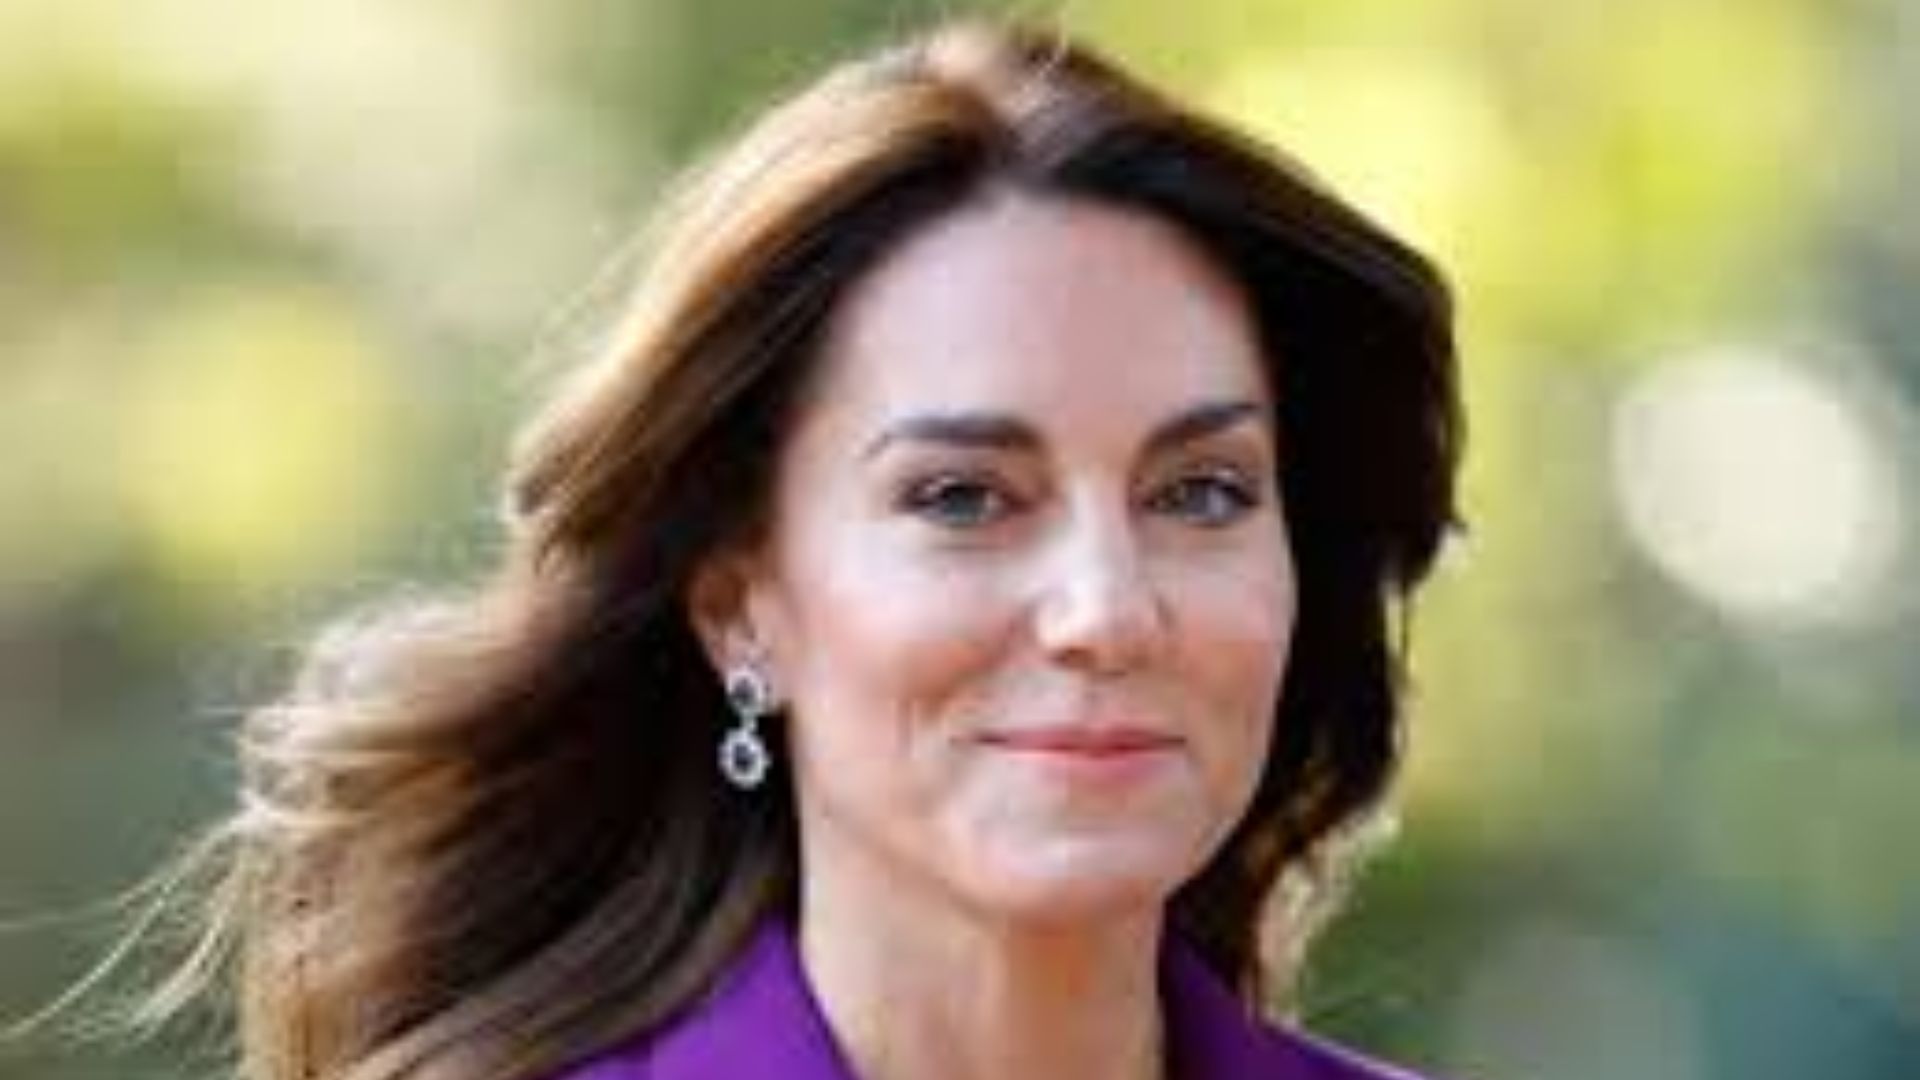 New photograph and video of Kate Middleton ignite conspiracy theories again